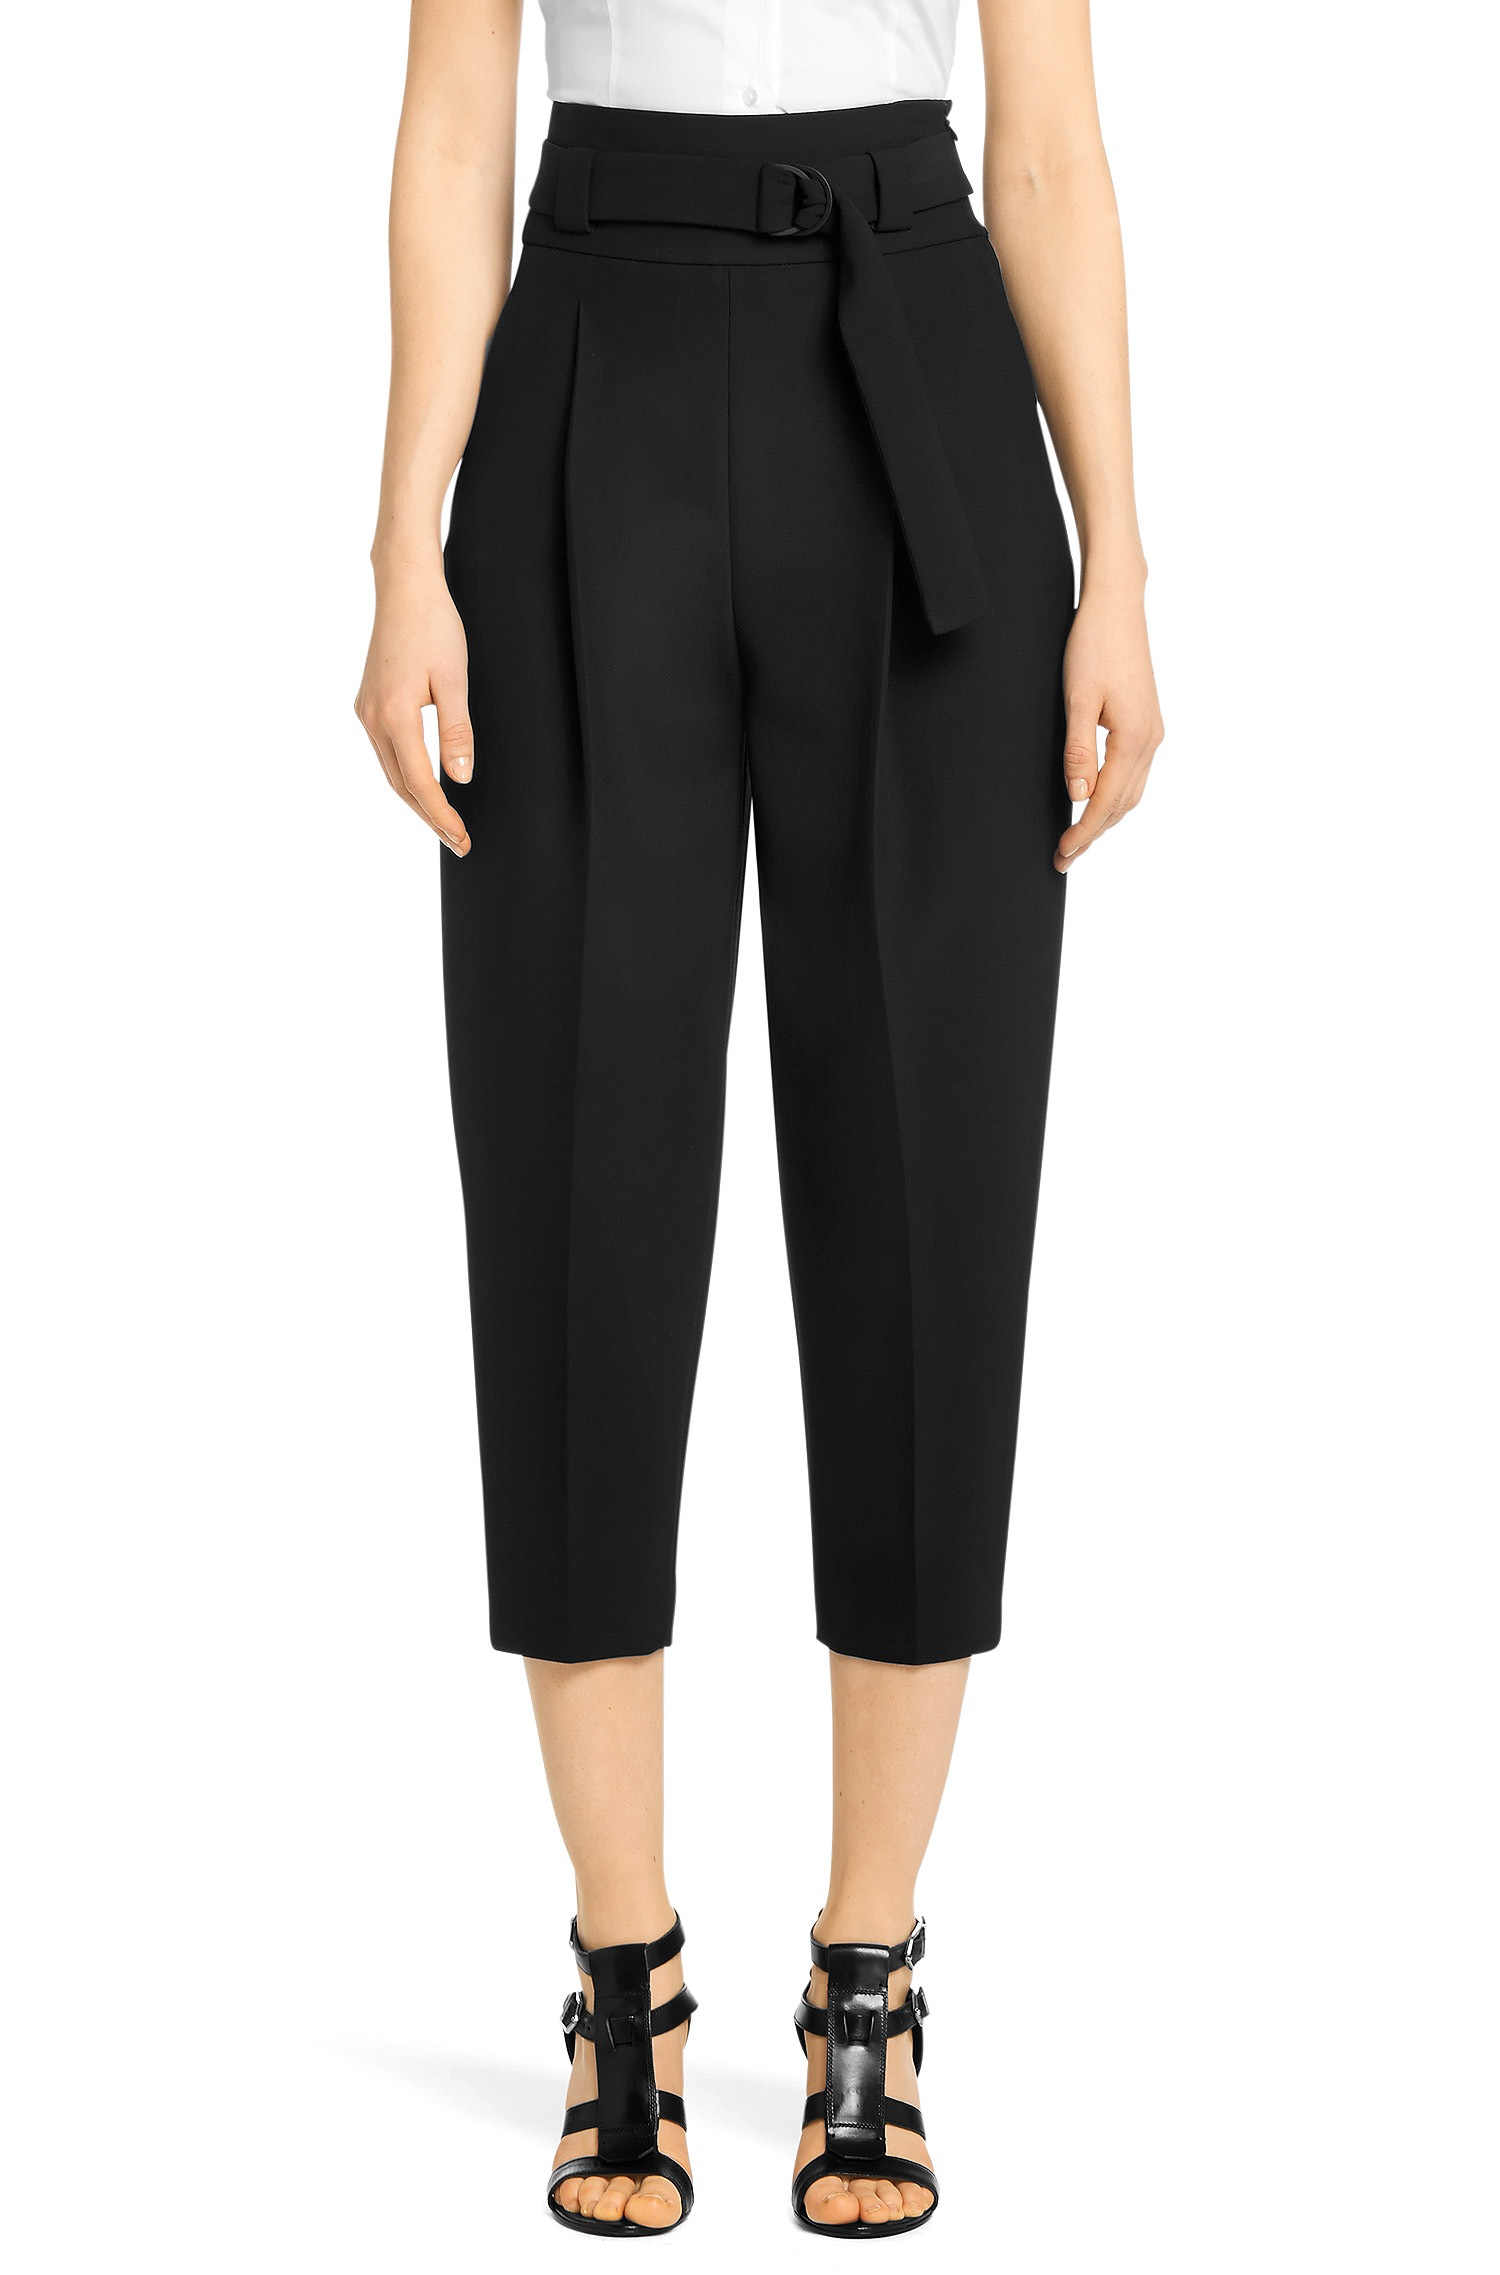 Lyst - Hugo 'Harella' | Stretch Cotton Belted High Waist Dress Pants in ...